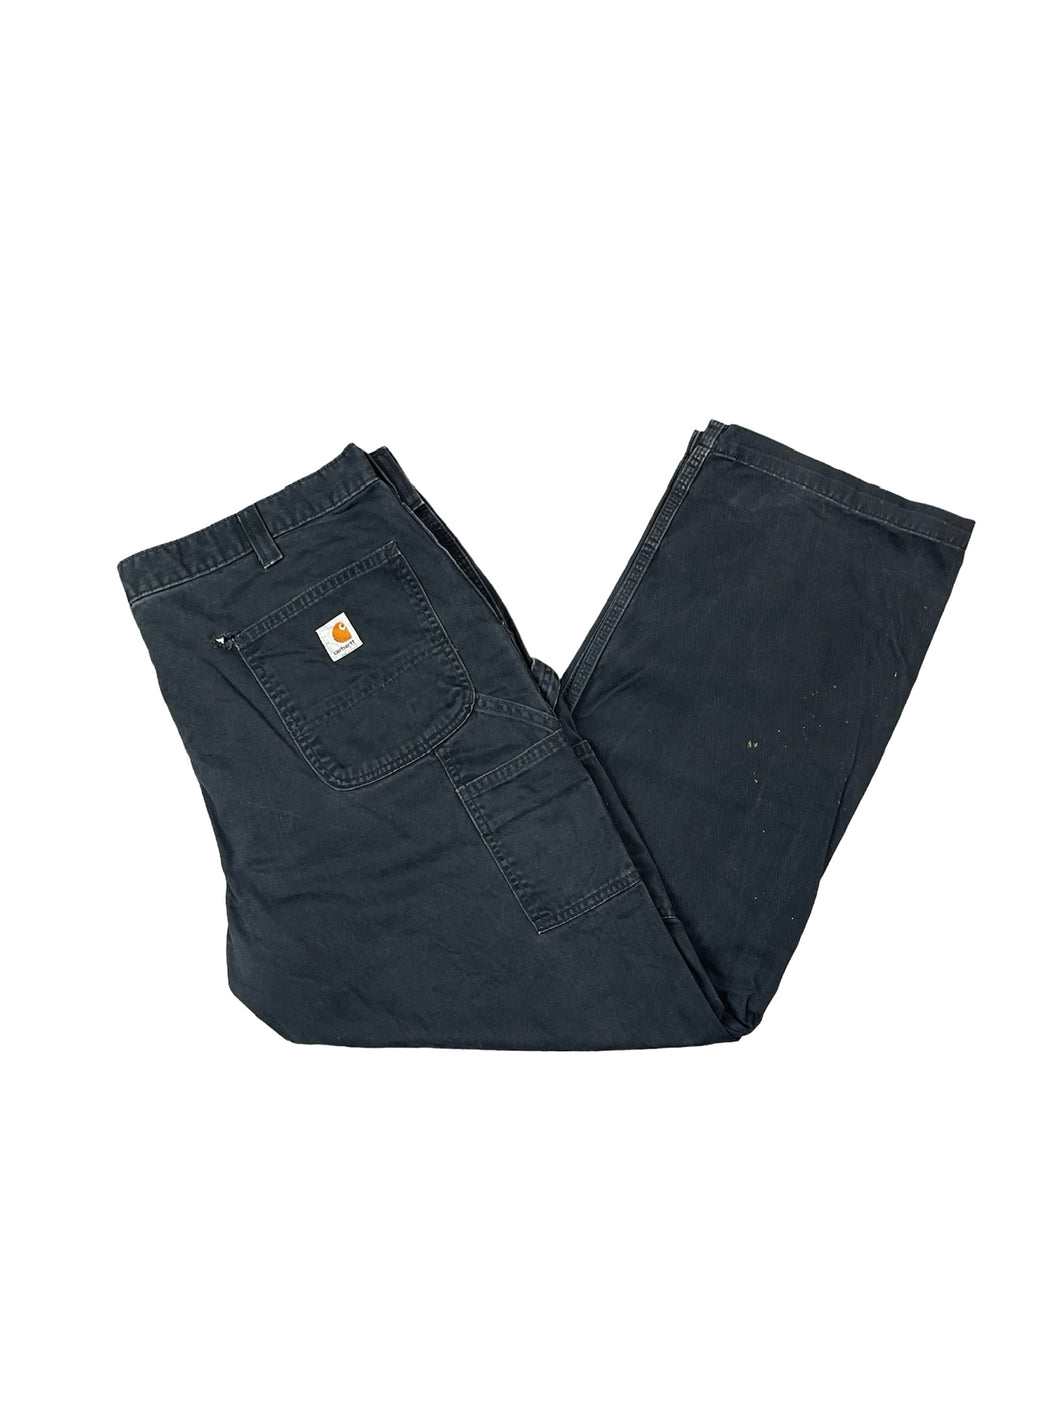 Carhartt Relaxed Fit Distressed Pant - XXLarge